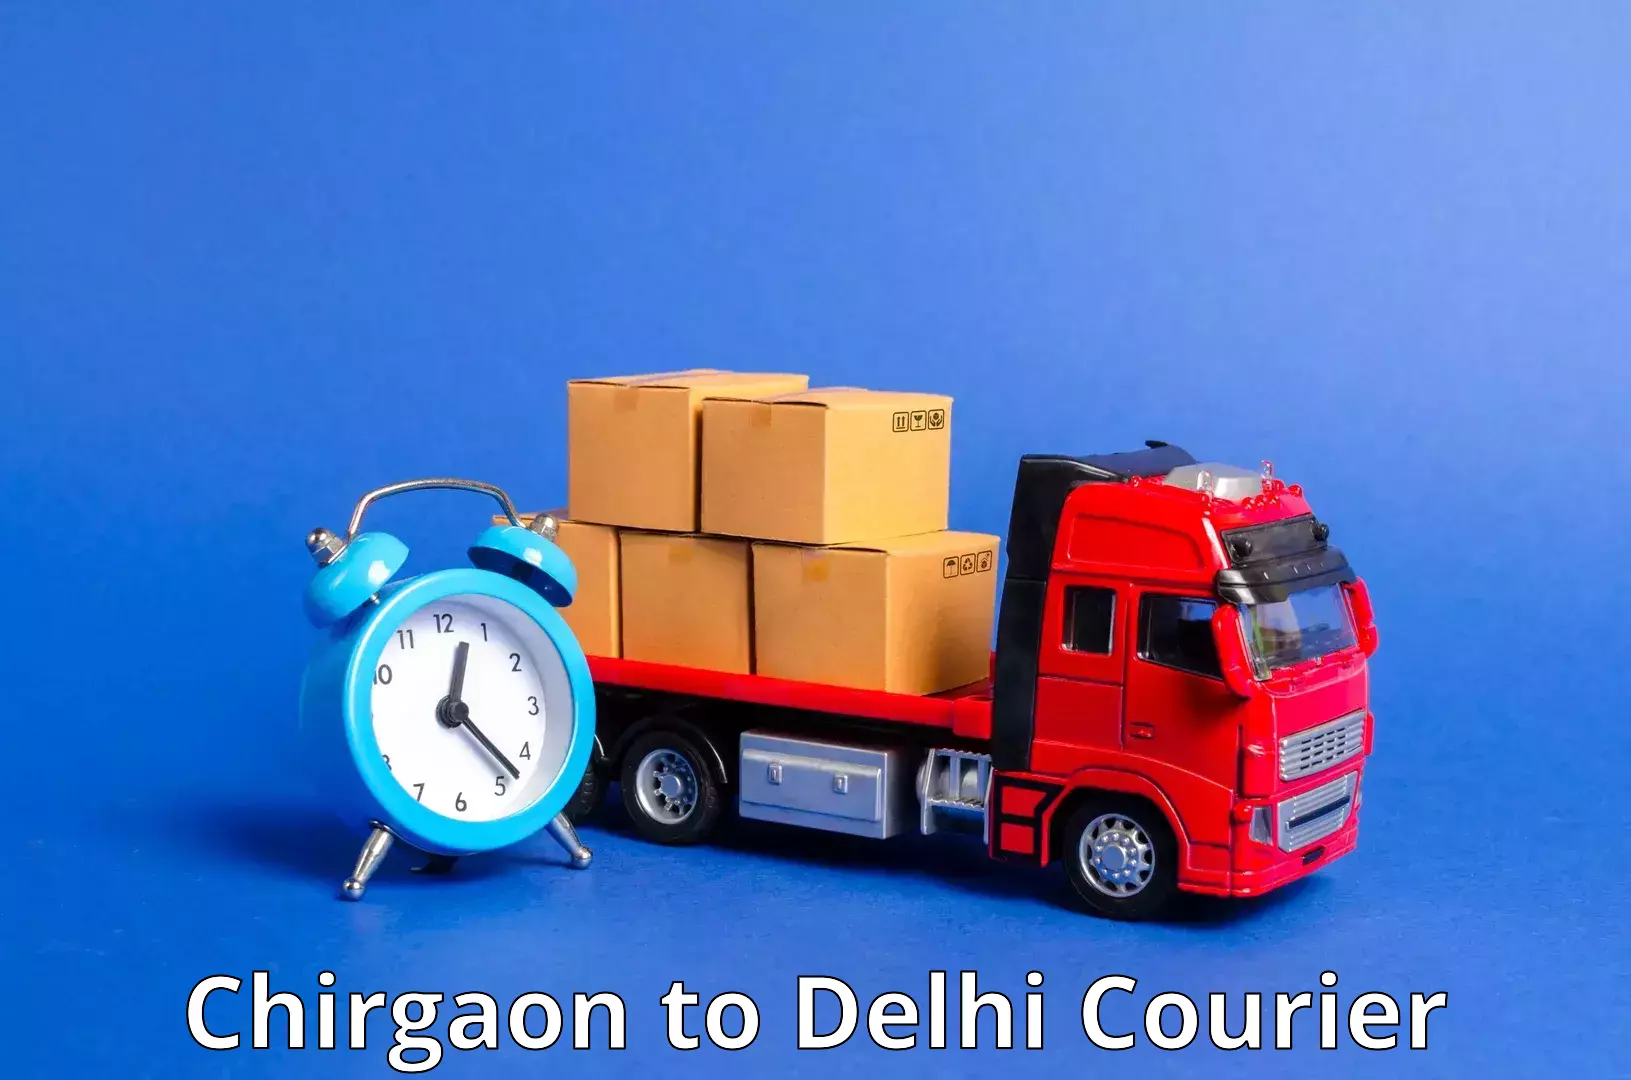 Reliable delivery network Chirgaon to Ramesh Nagar